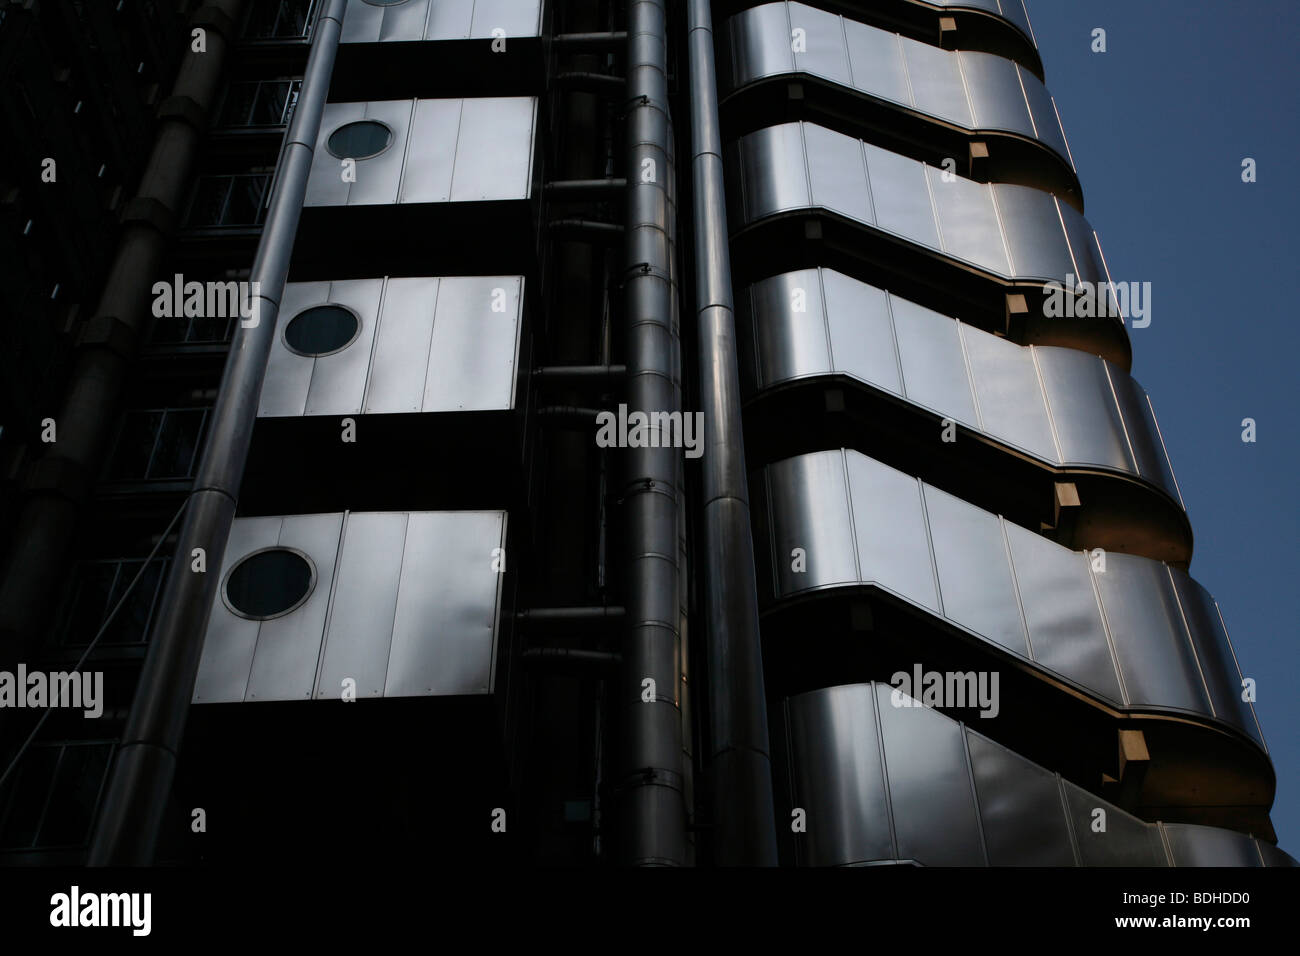 Lloyds Building in Lime Street, City of London, UK Stock Photo